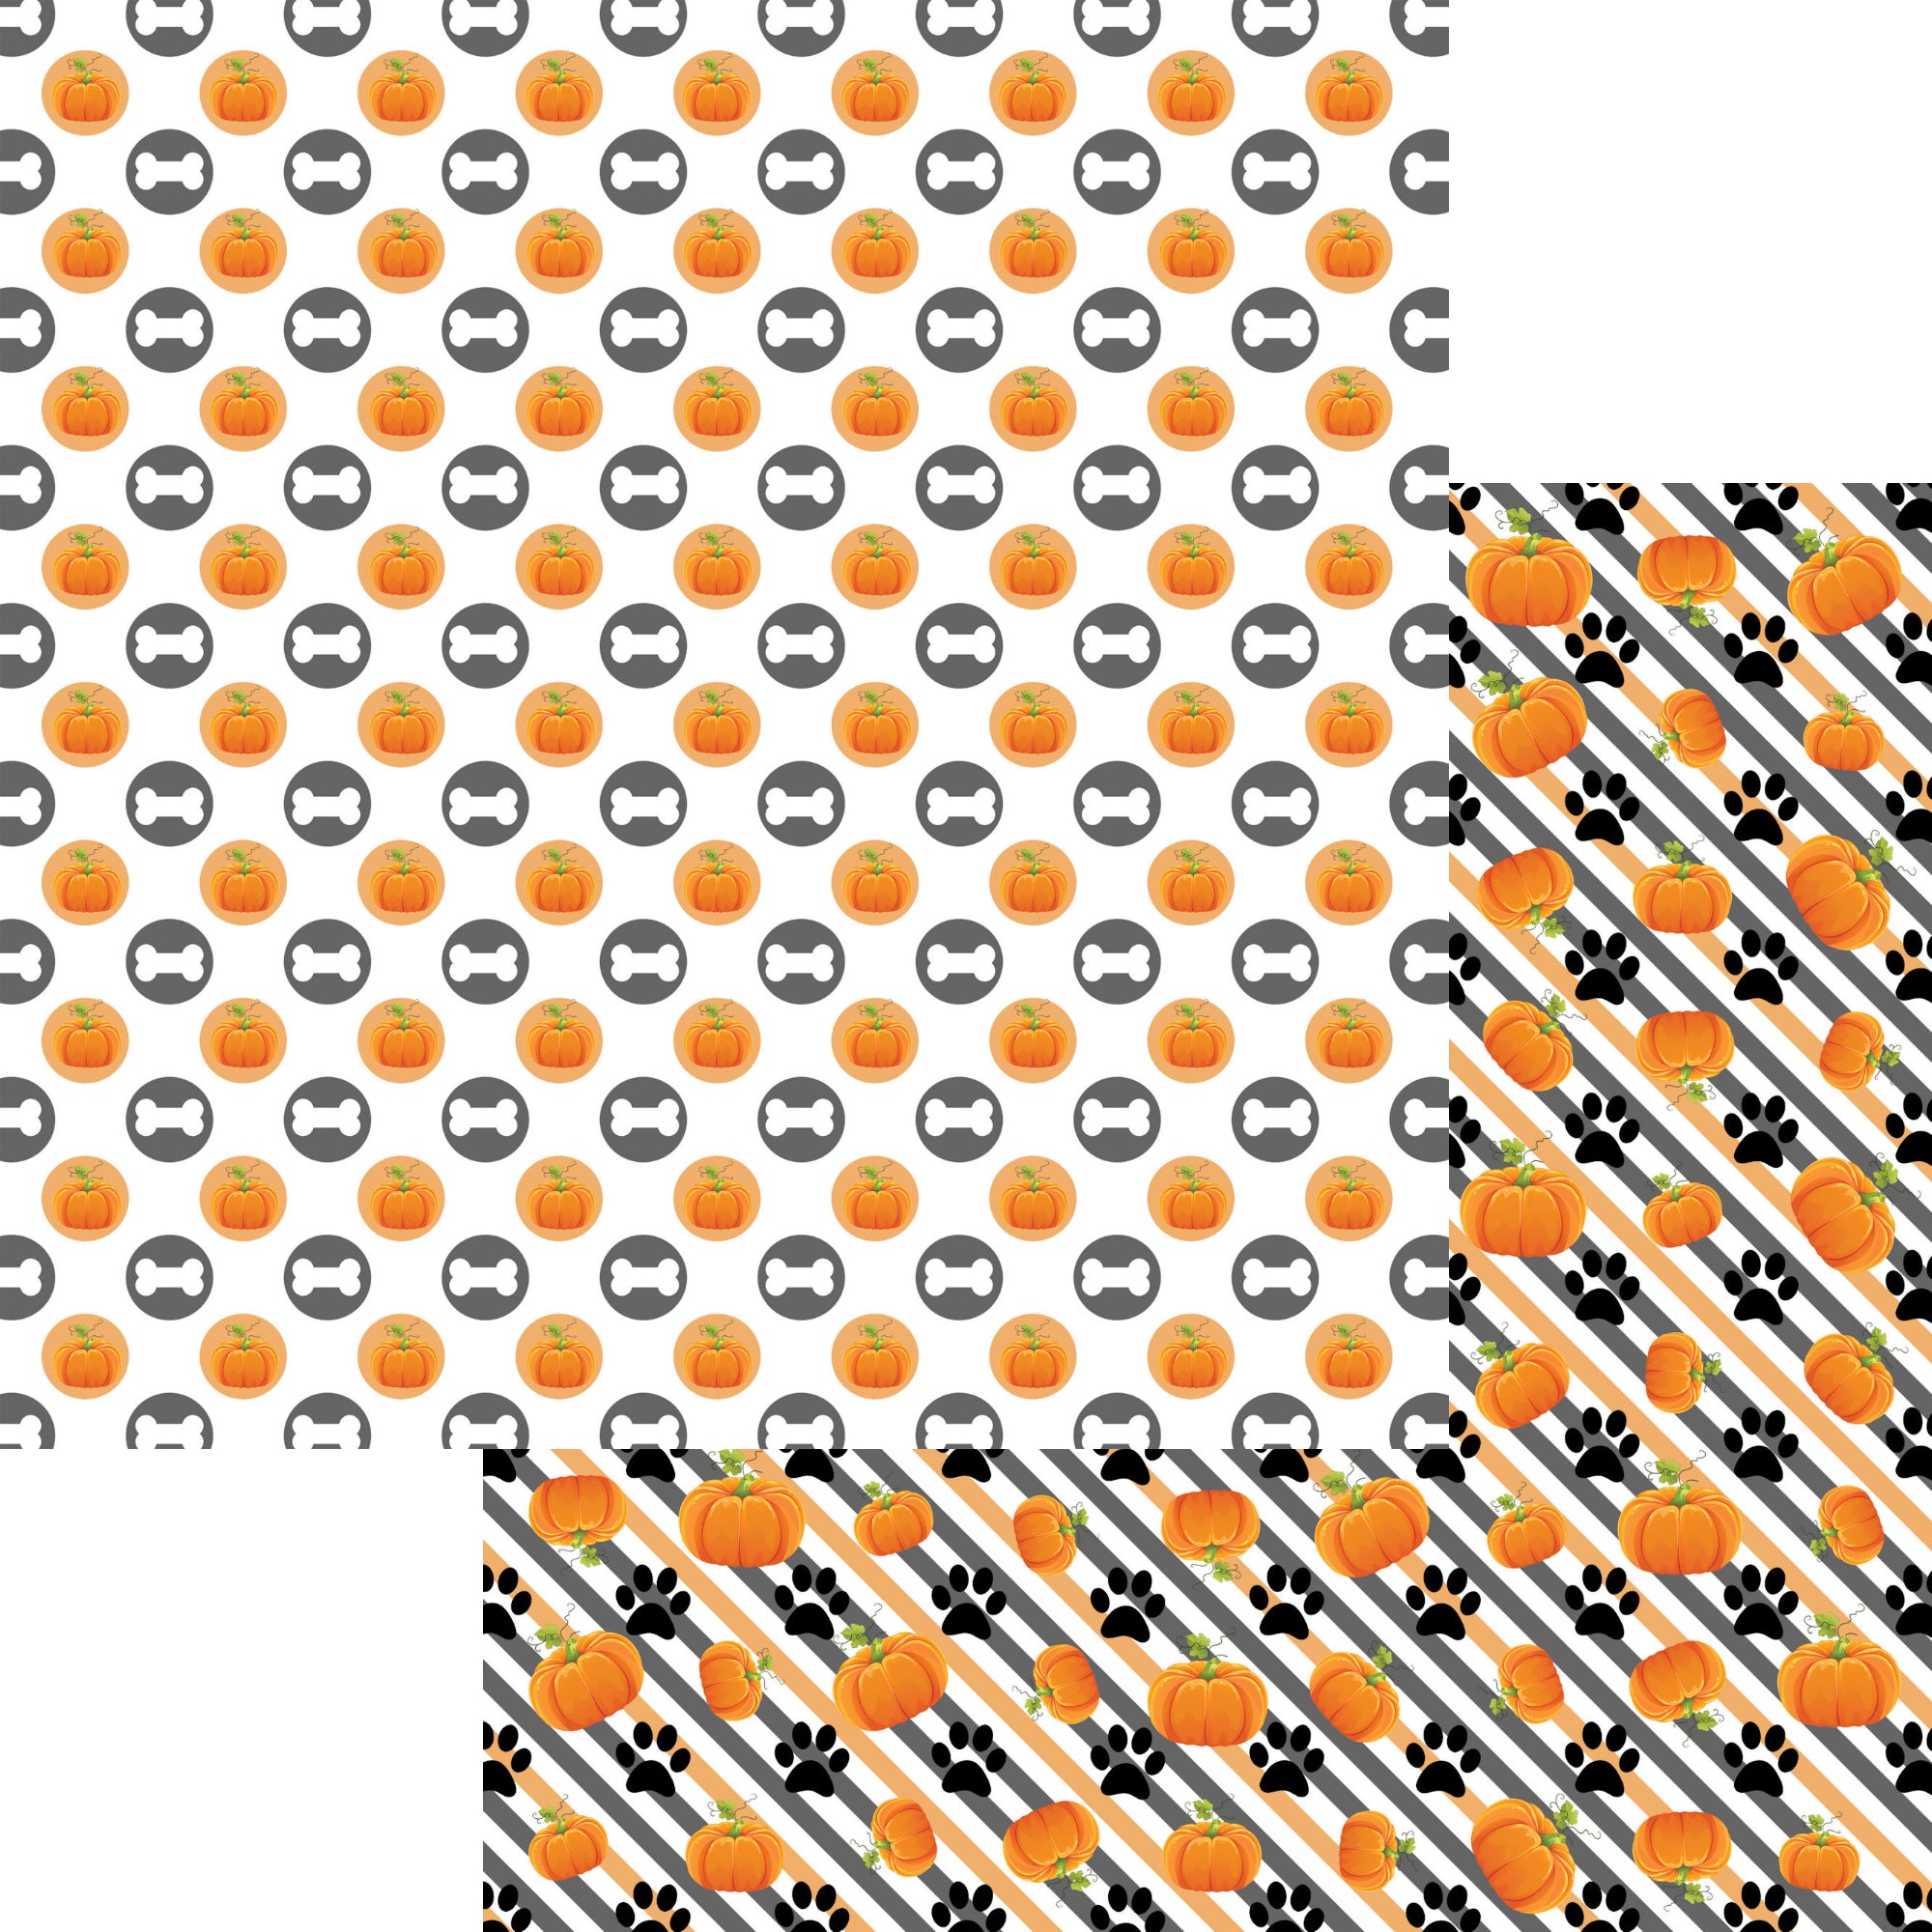 Happy Bow-Wow-Ween Collection Dem Bones 12 x 12 Double-Sided Scrapbook Paper by SSC Designs